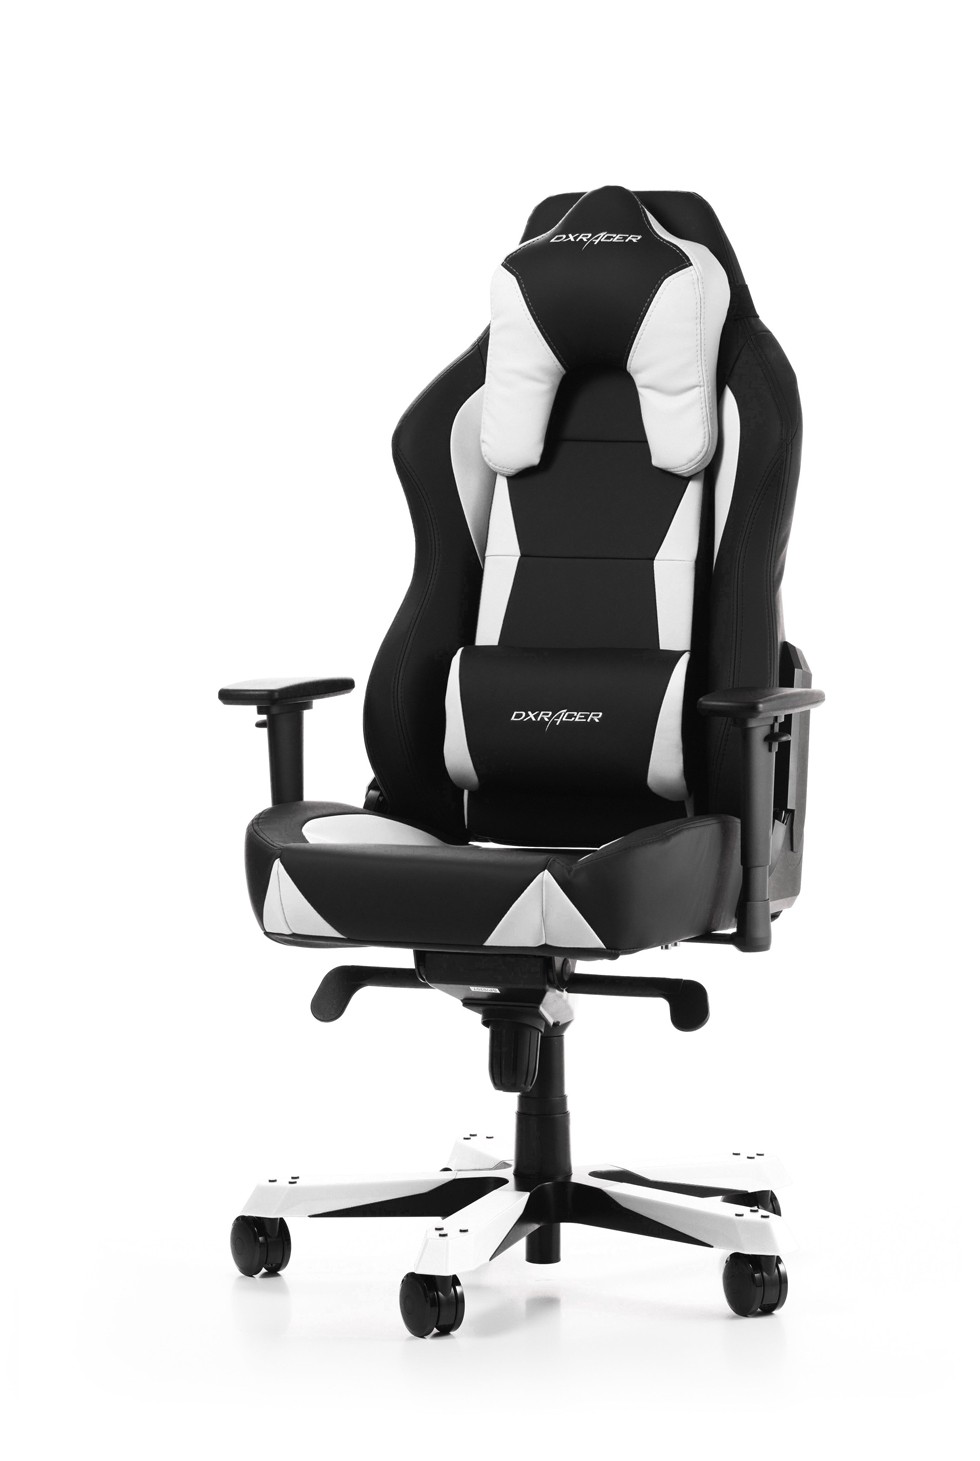 GAMING CHAIR DXRACER WORK SERIES W06-NW WHITE